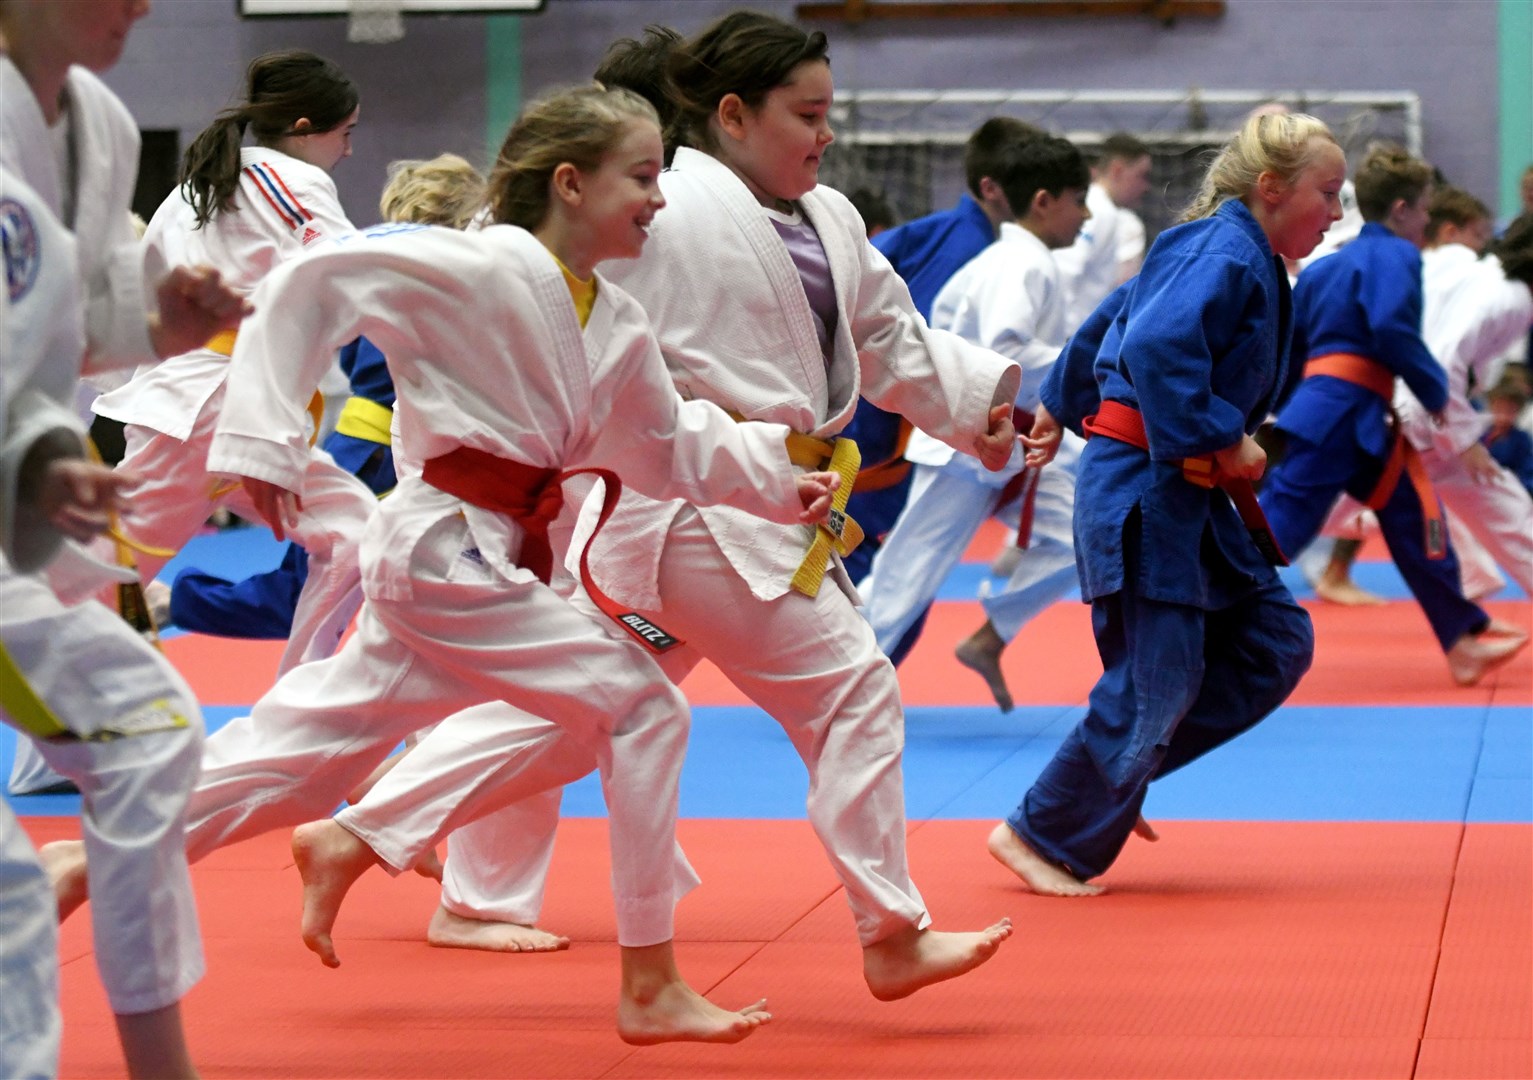 Lots of fun at the judo training session to which supporting businesses were invited. Picture: James Mackenzie.